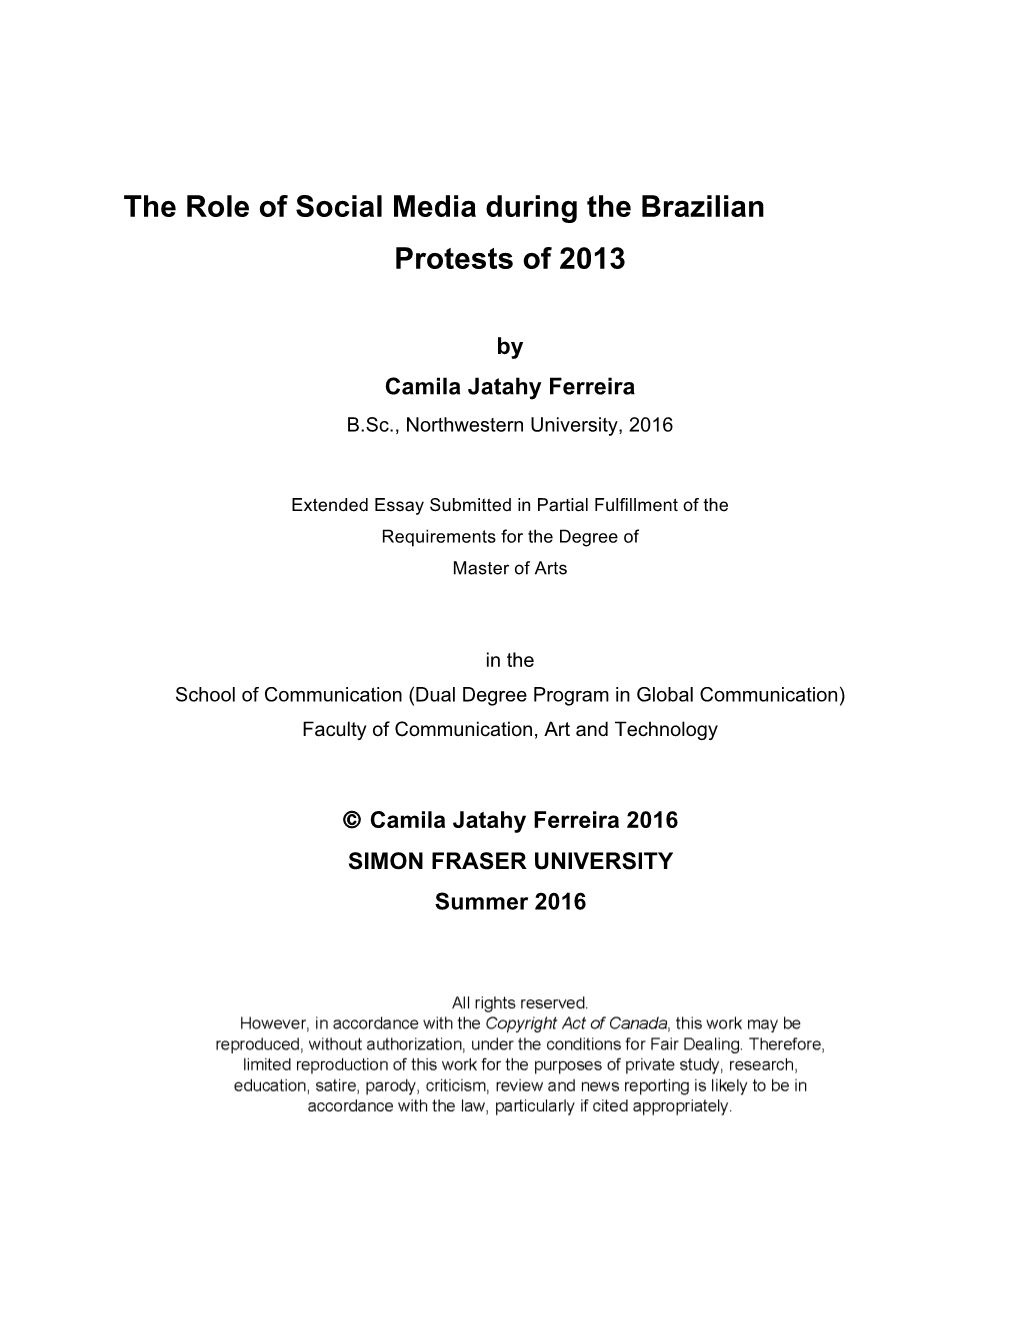 The Role of Social Media During the Brazilian Protests of 2013